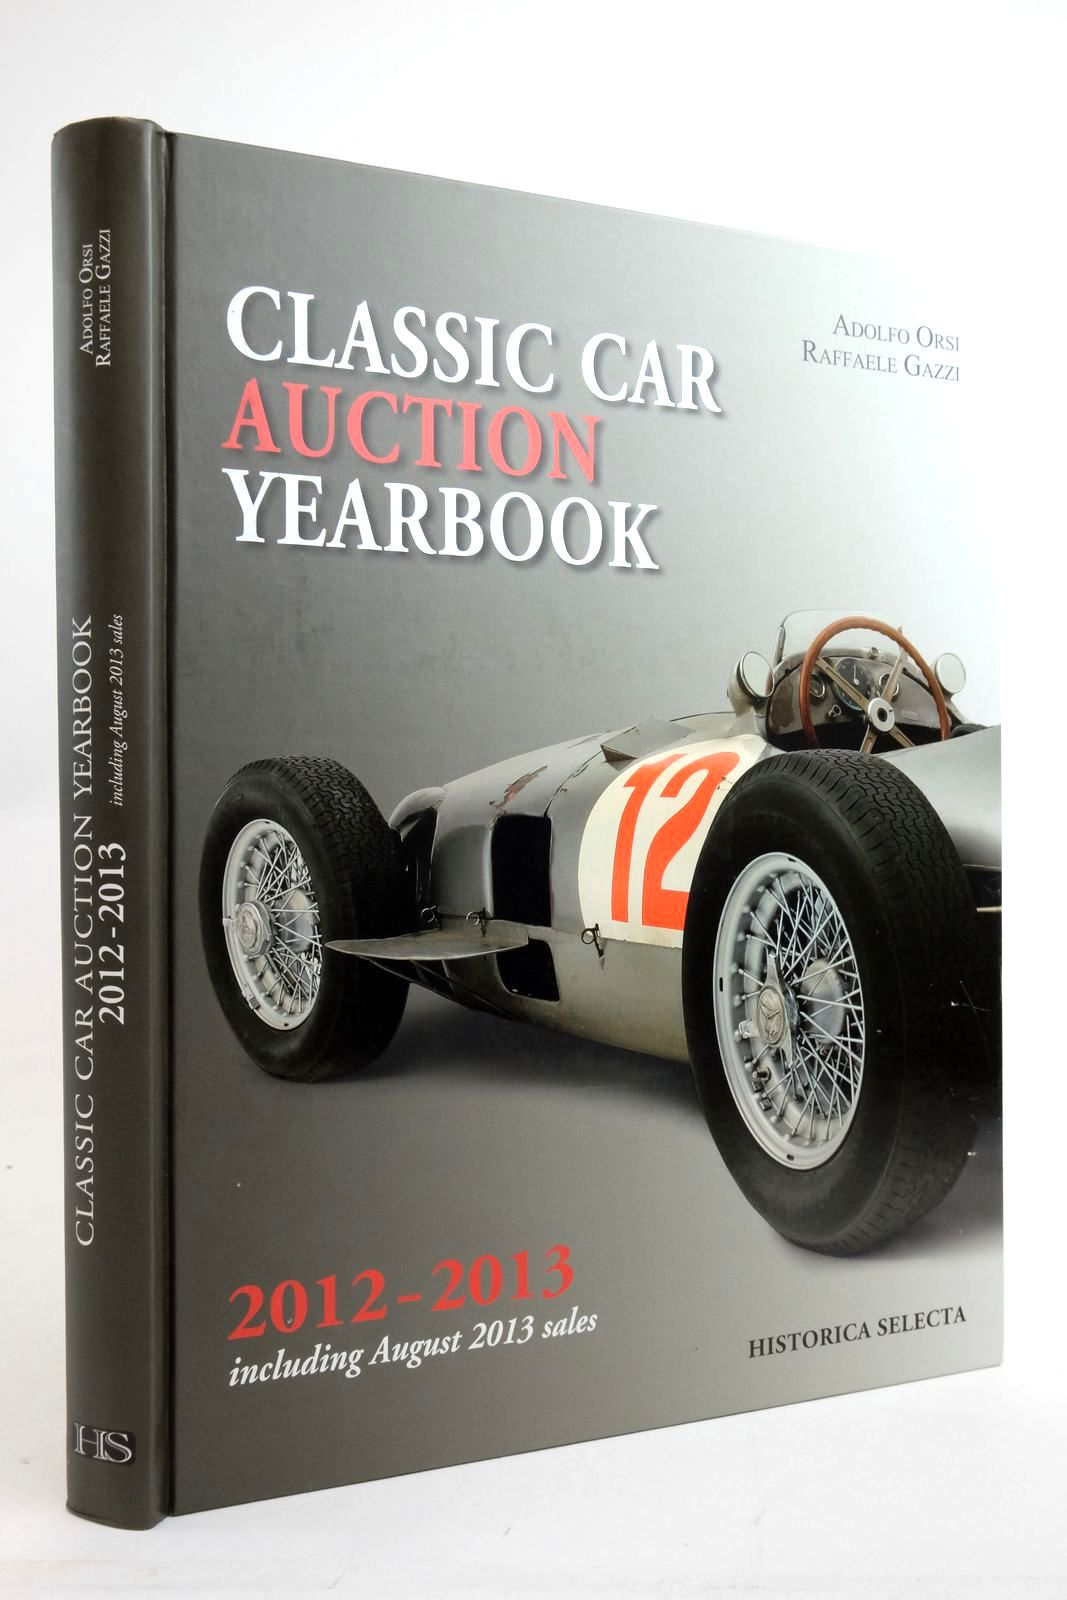 Photo of CLASSIC CAR AUCTION YEARBOOK 2012-2013 written by Orsi, Adolfo Gazzi, Raffaele published by Historica Selecta (STOCK CODE: 2136570)  for sale by Stella & Rose's Books